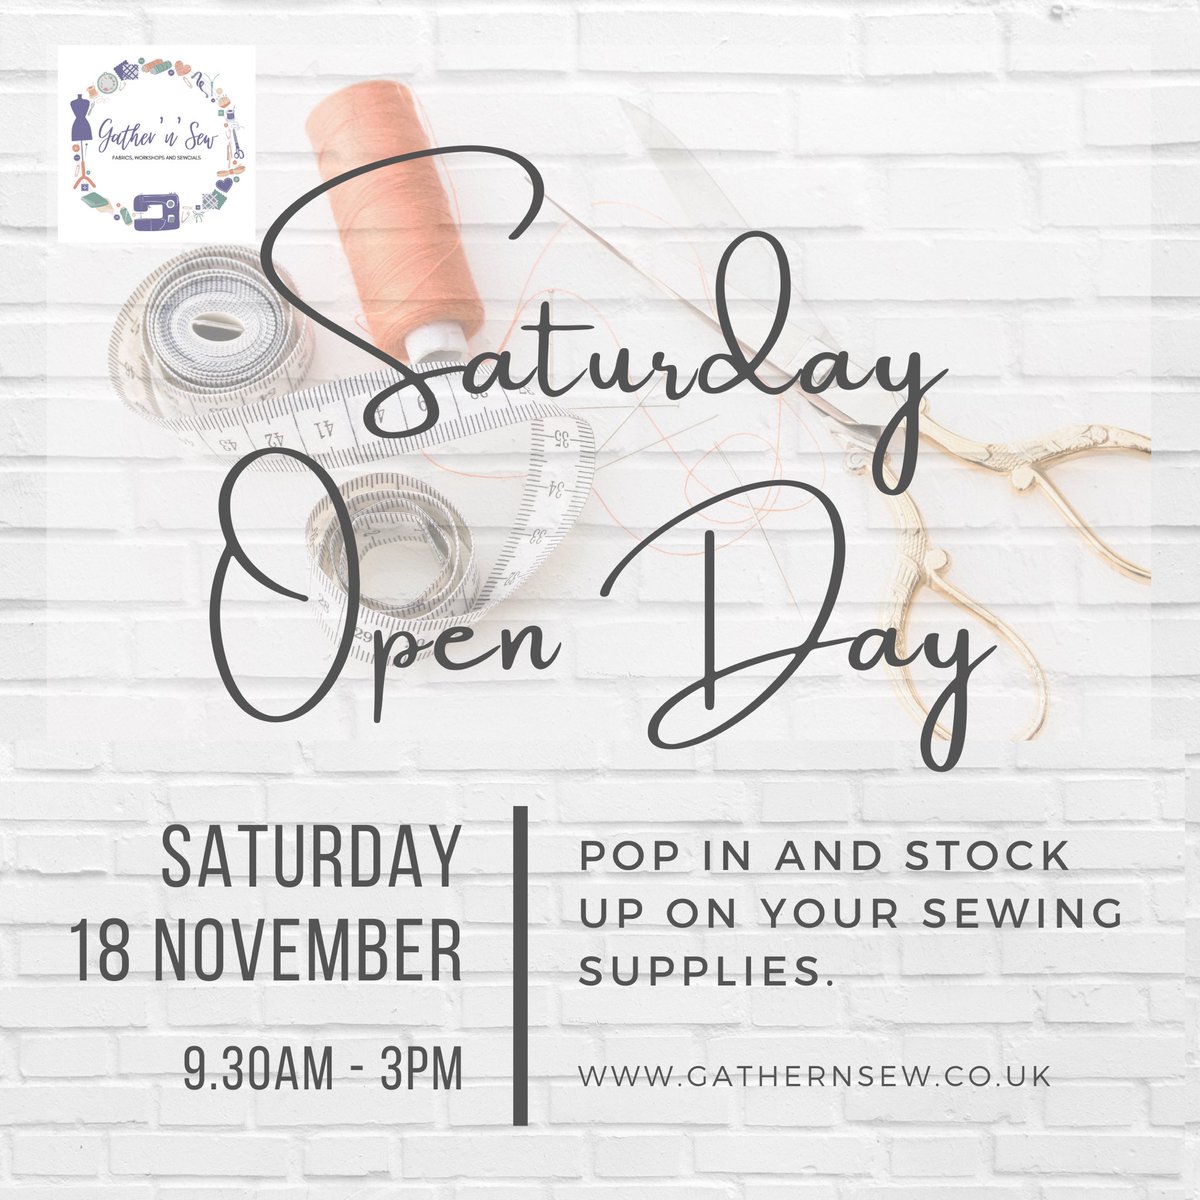 It’s almost time! Get your shopping lists ready for our monthly Saturday Shop OPEN Day this weekend (18th November). There may just be an extra treat waiting for you 😉 See you then! 💜
#shoplocal #shoplocalbourne #fabric #fabricshop #fabricaddict #sewingshop #isew